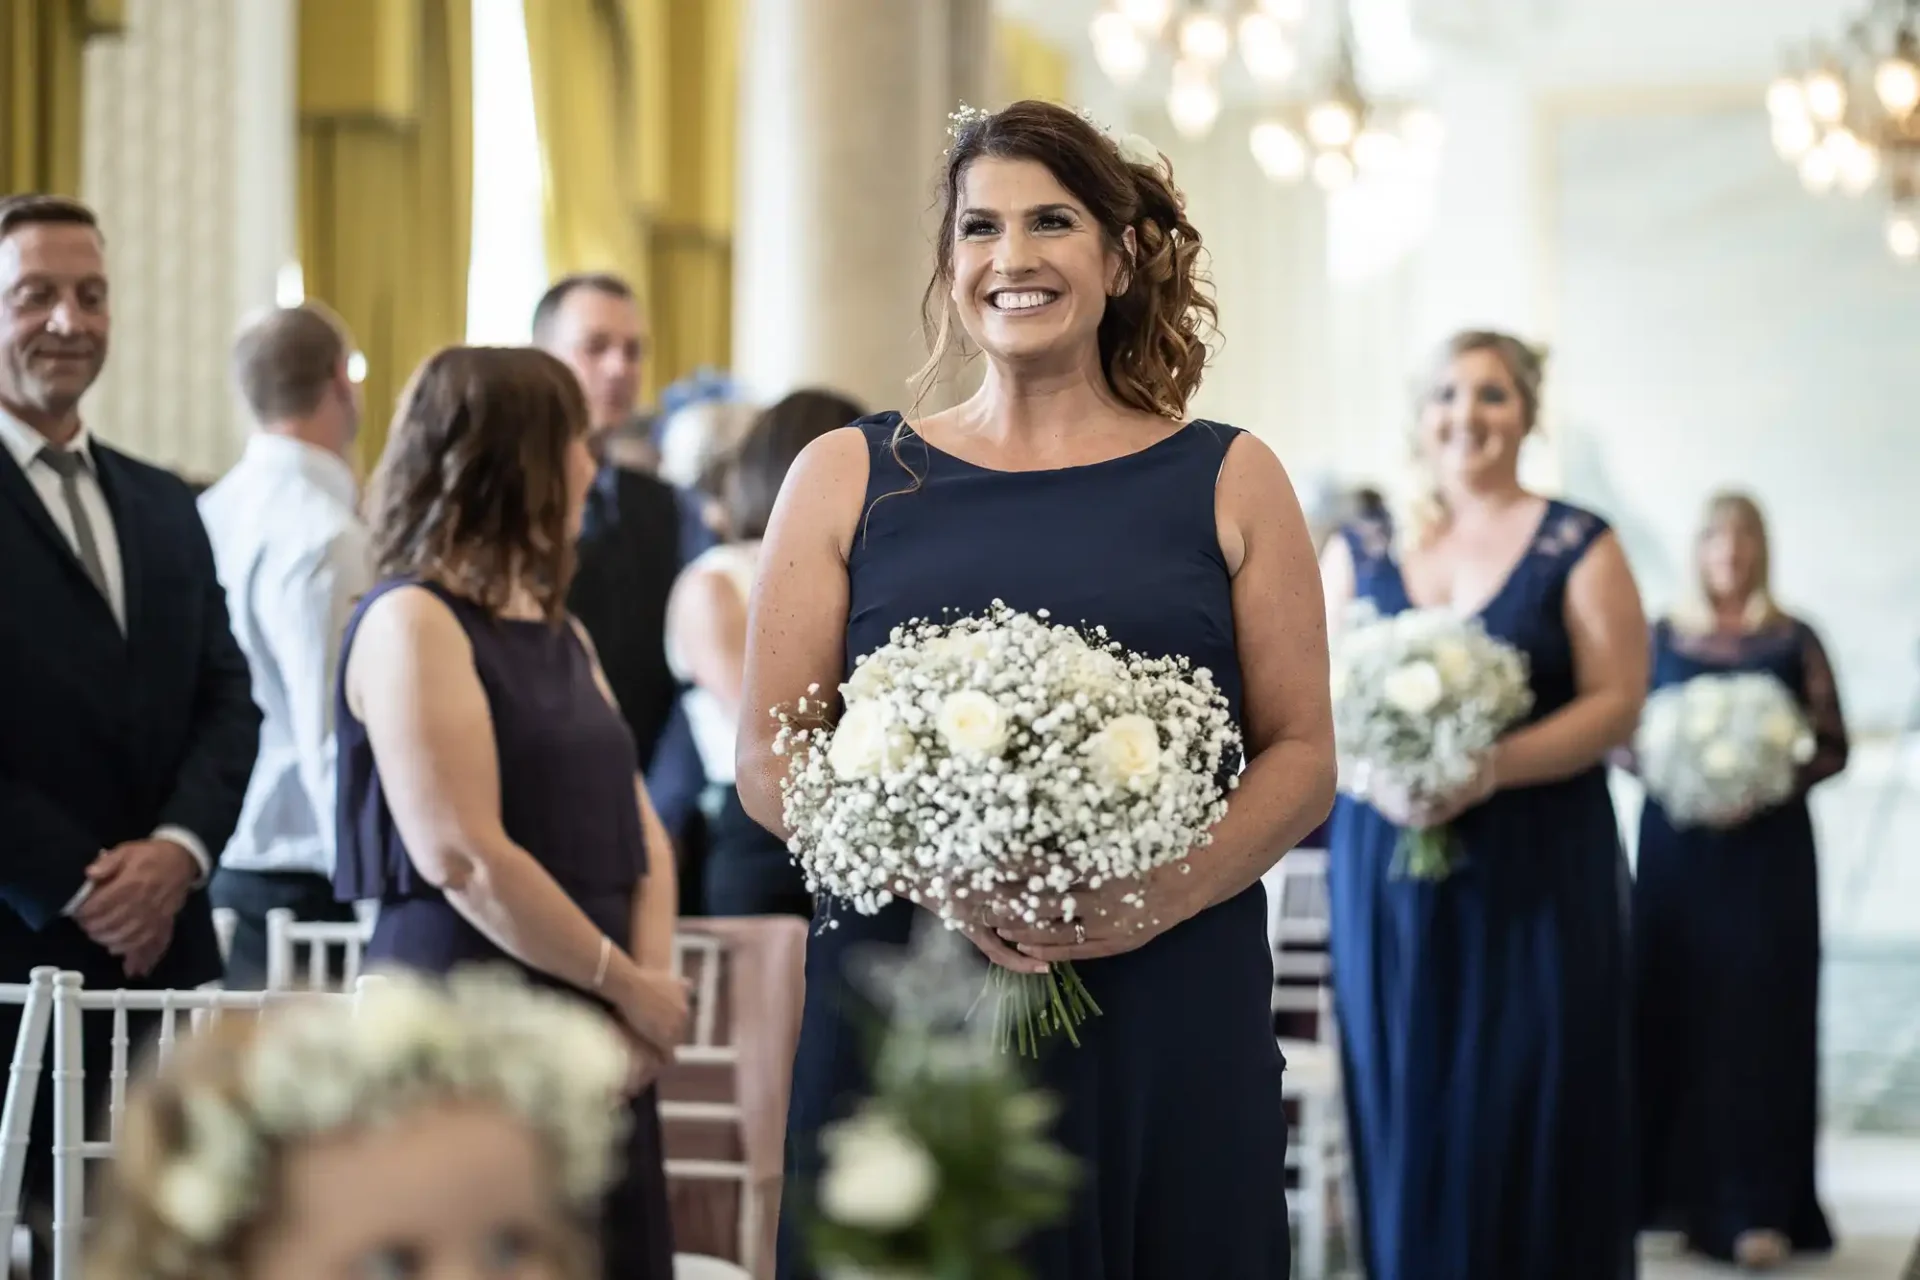 A woman in a blue dress smiling while holding a bouquet of white flowers at a wedding ceremony, with guests in the background.